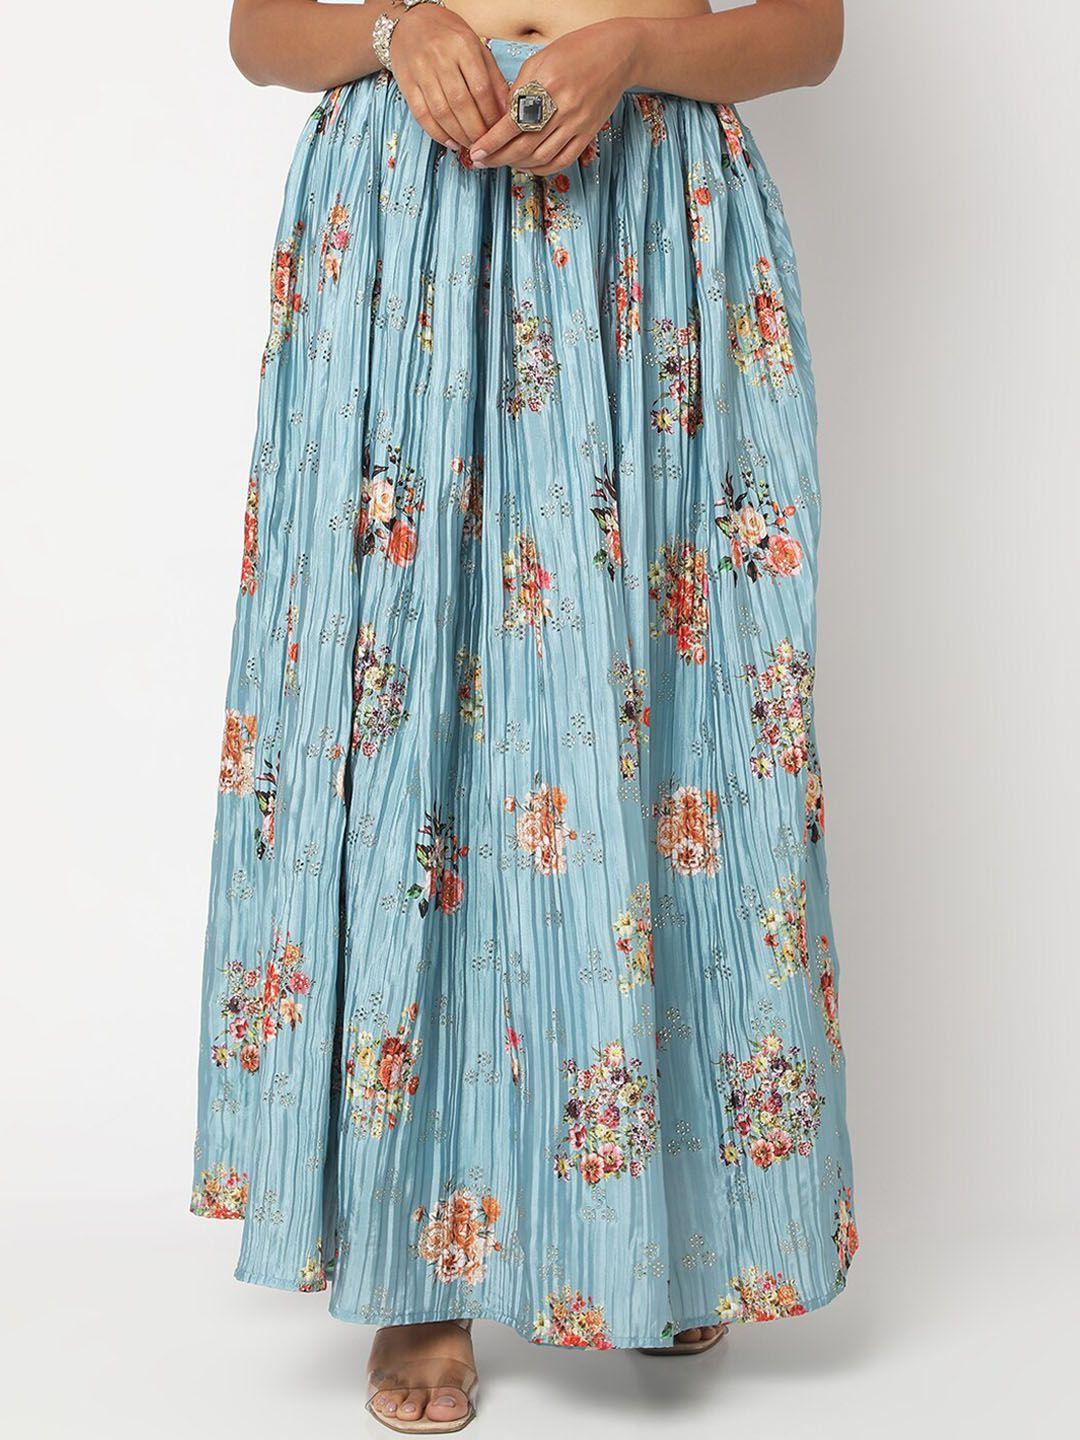 ethnicity-women-floral-printed-flared-maxi-skirt